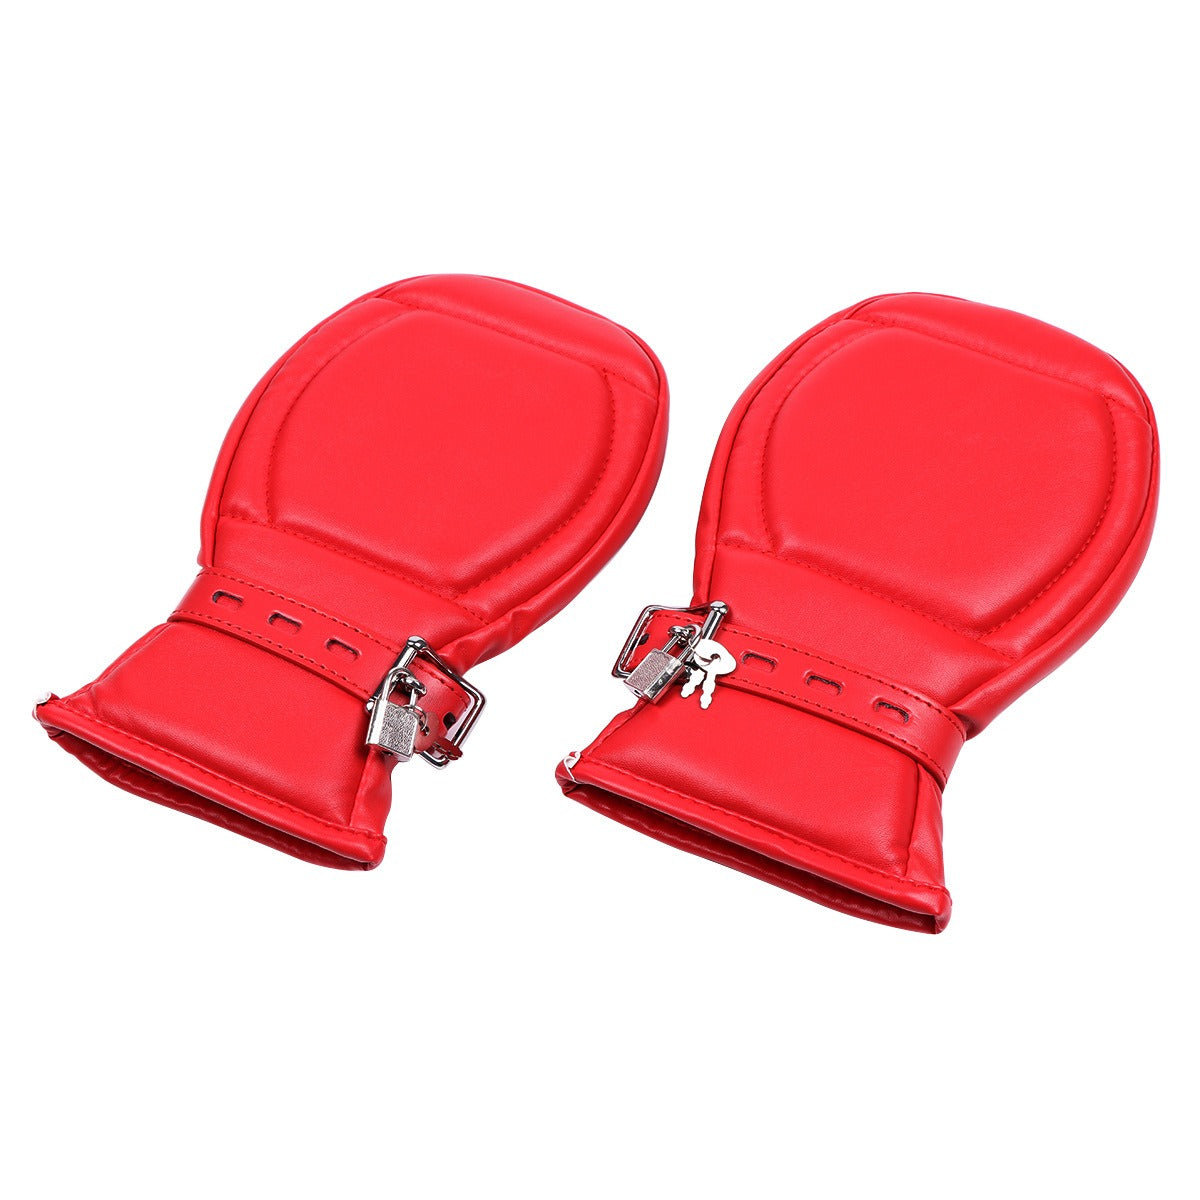 PADDED PUP PAW LOCKABLE MITTS - Red